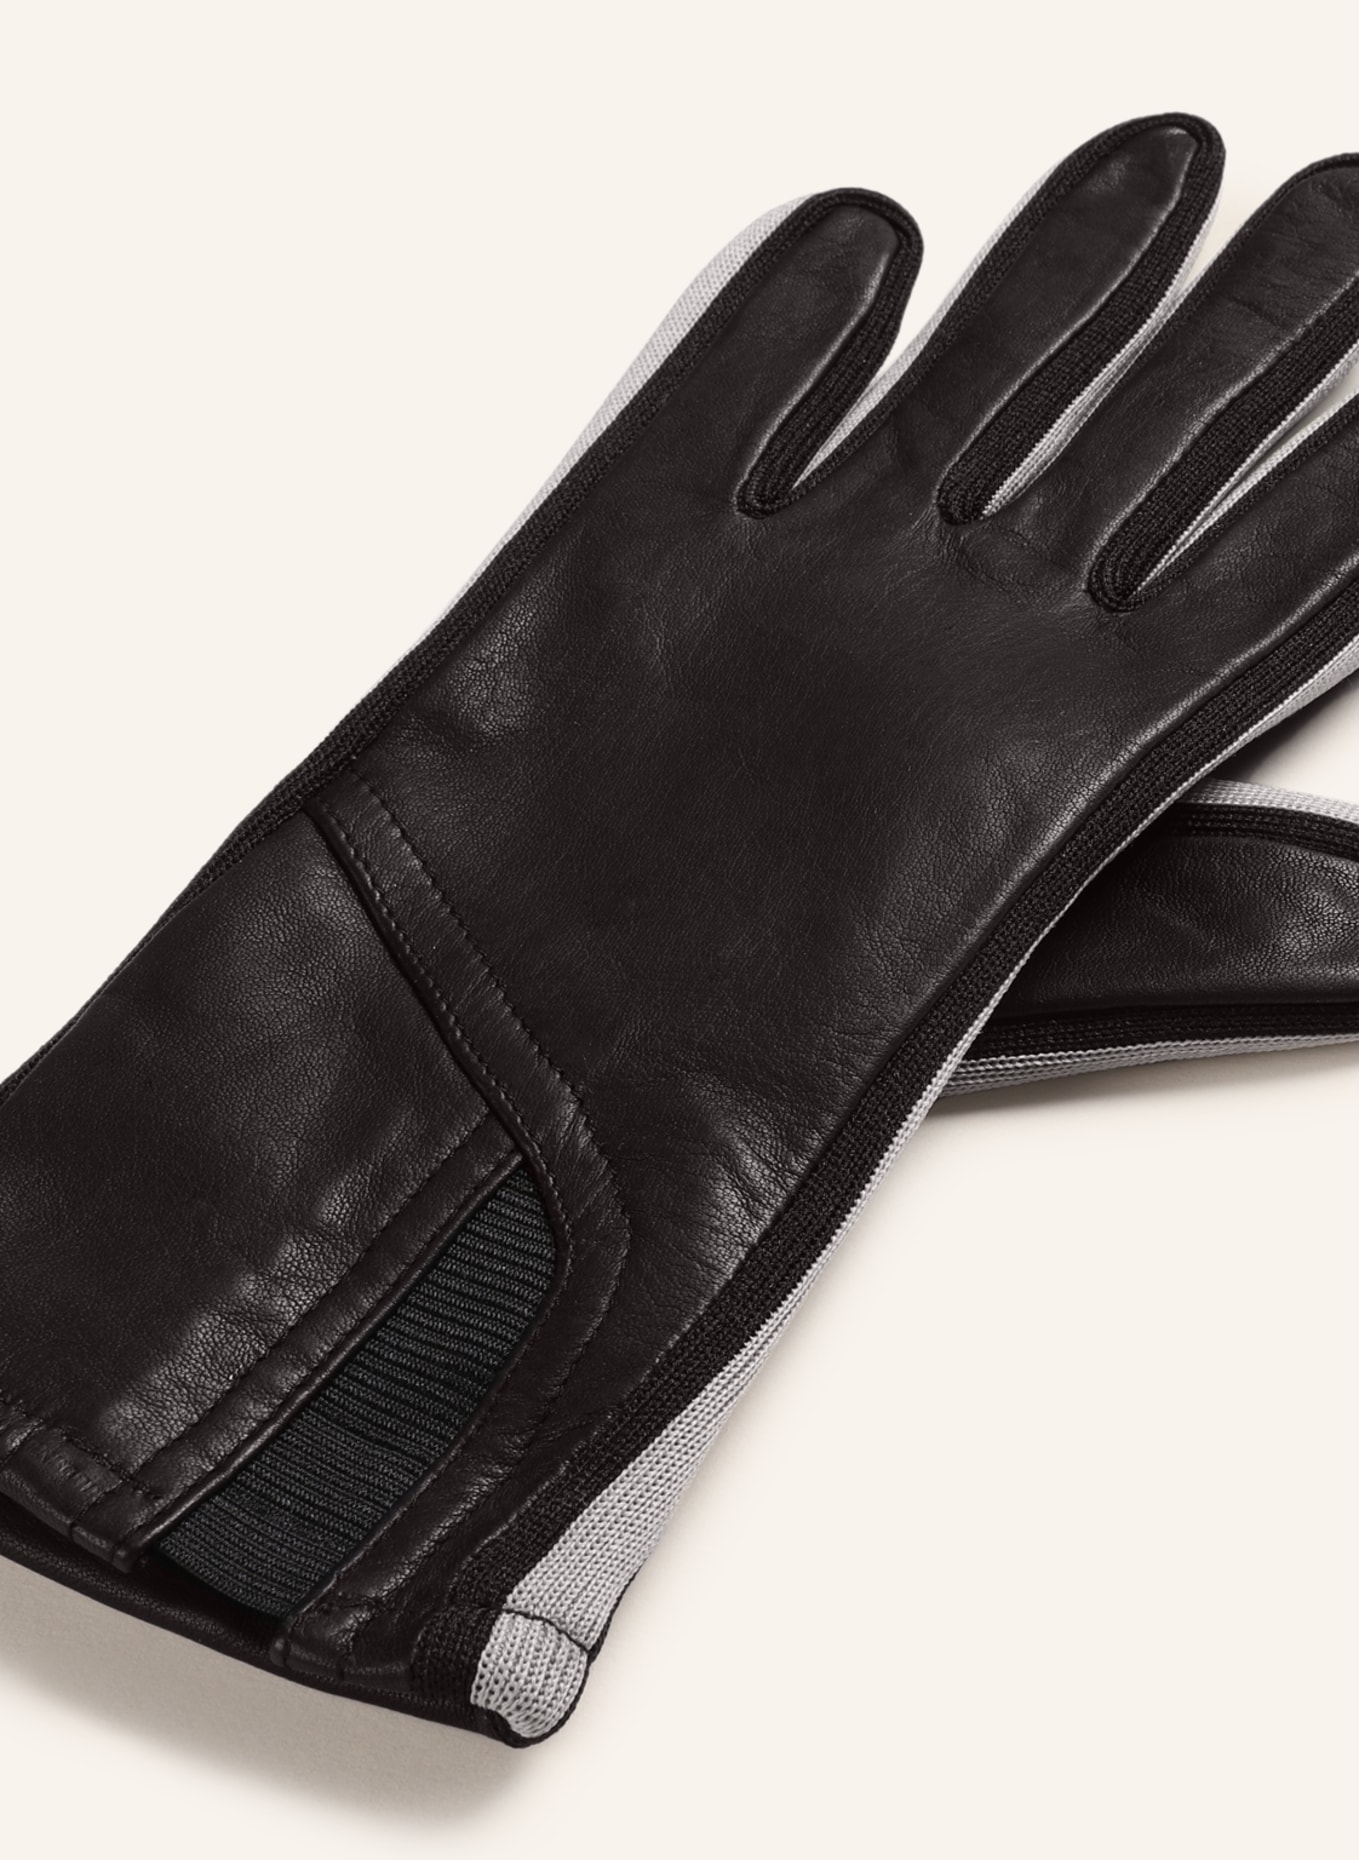 KESSLER Leather gloves GIL TOUCH with touchscreen function in black